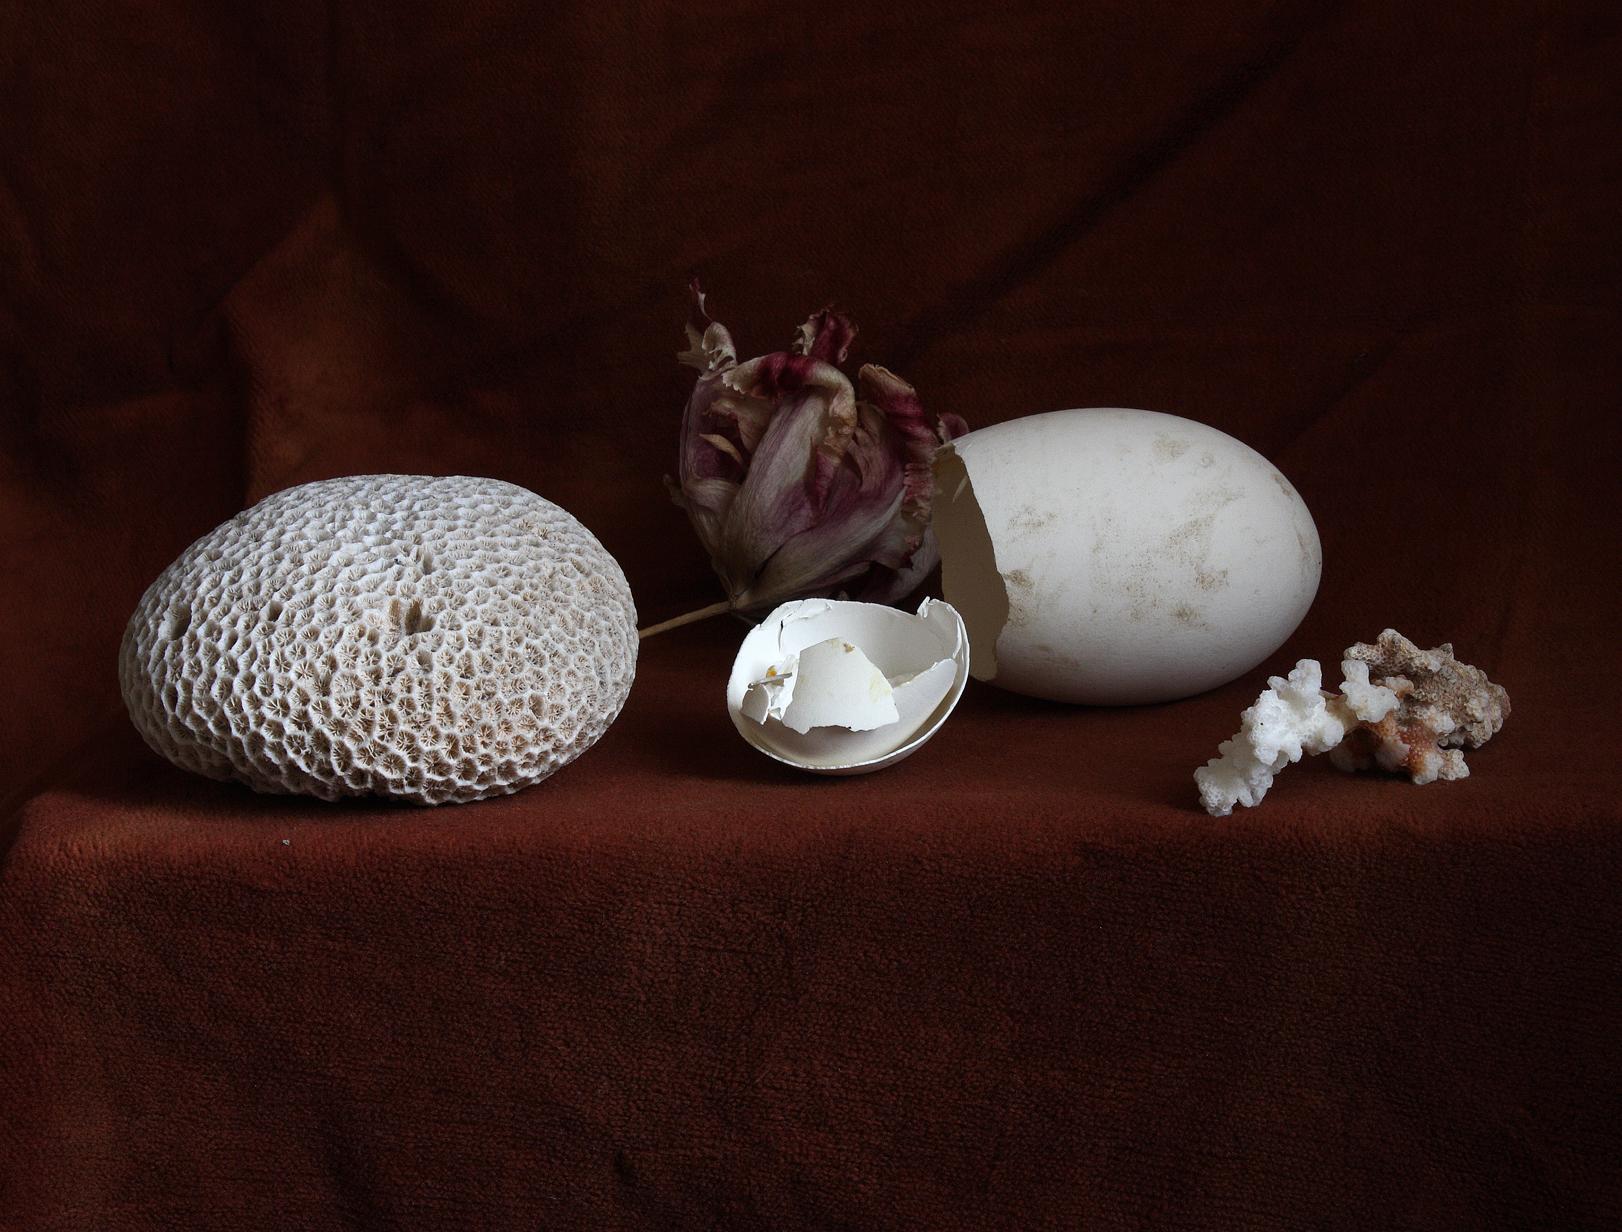 Michael James O’Brien Color Photograph - Still Life with a Broken Egg, Antwerp. Limited edition color photograph